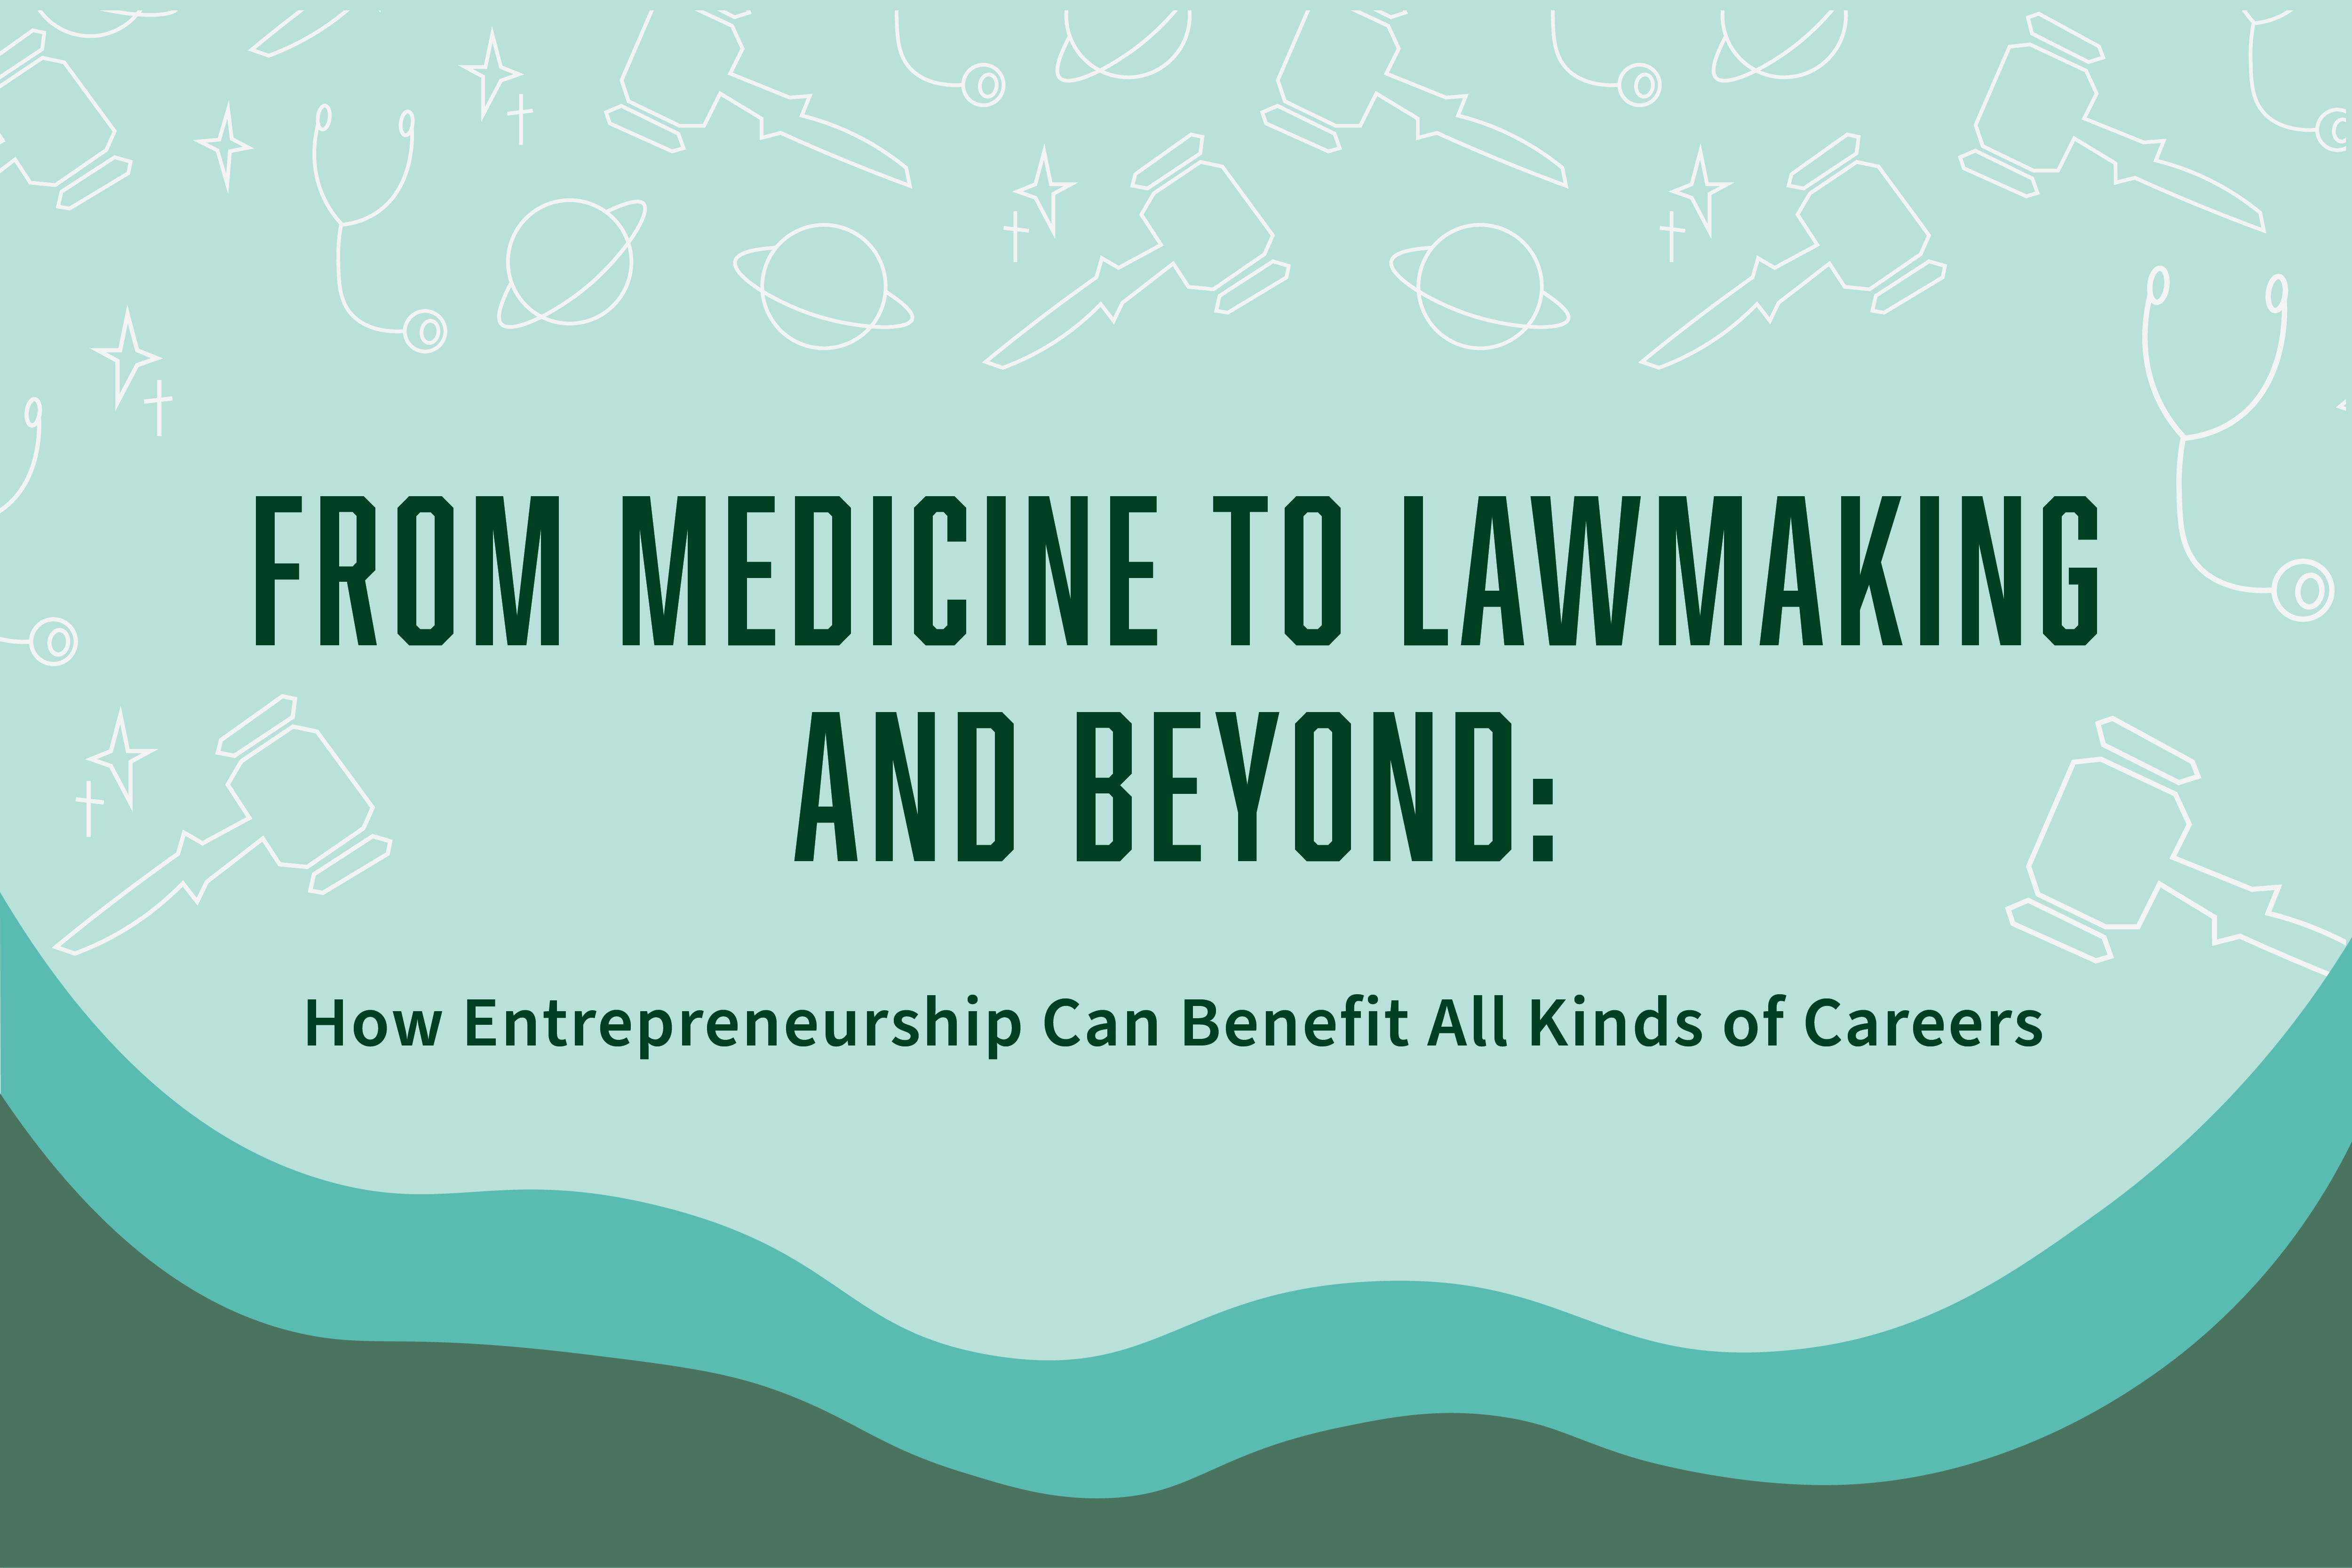 The words "From Medicine to Lawmaking and Beyond: How entrepreneurship can benefit all kinds of careers" in a green, bold font against a light blue background patterned with white stethoscopes, gavels, planets and stars.